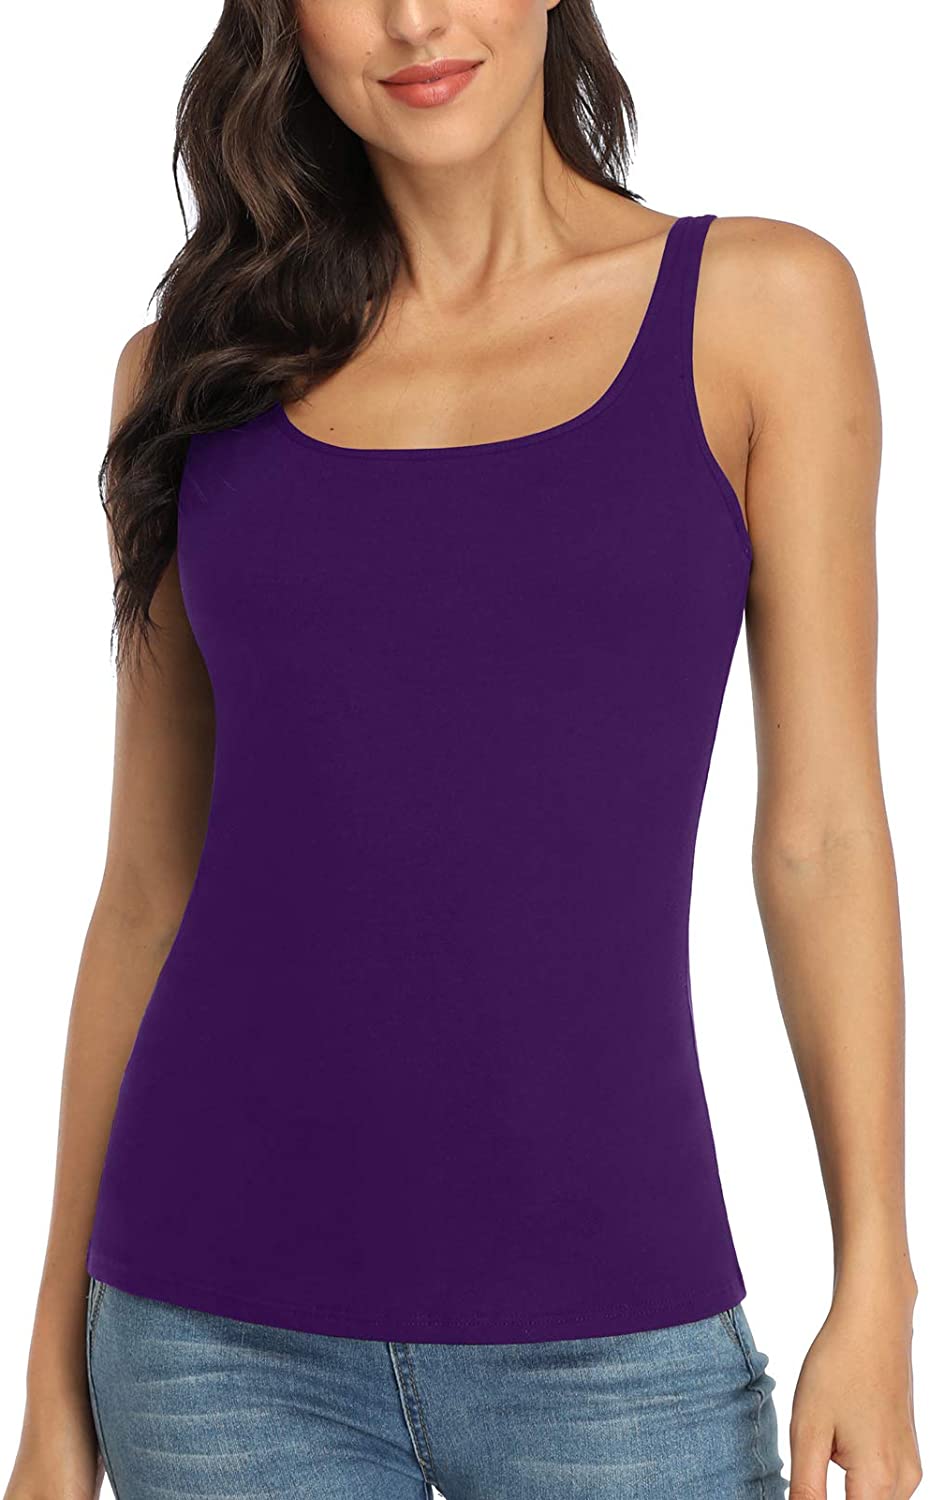 V FOR CITY Women's Cotton Tank Top with Shelf Bra Adjustable Wider